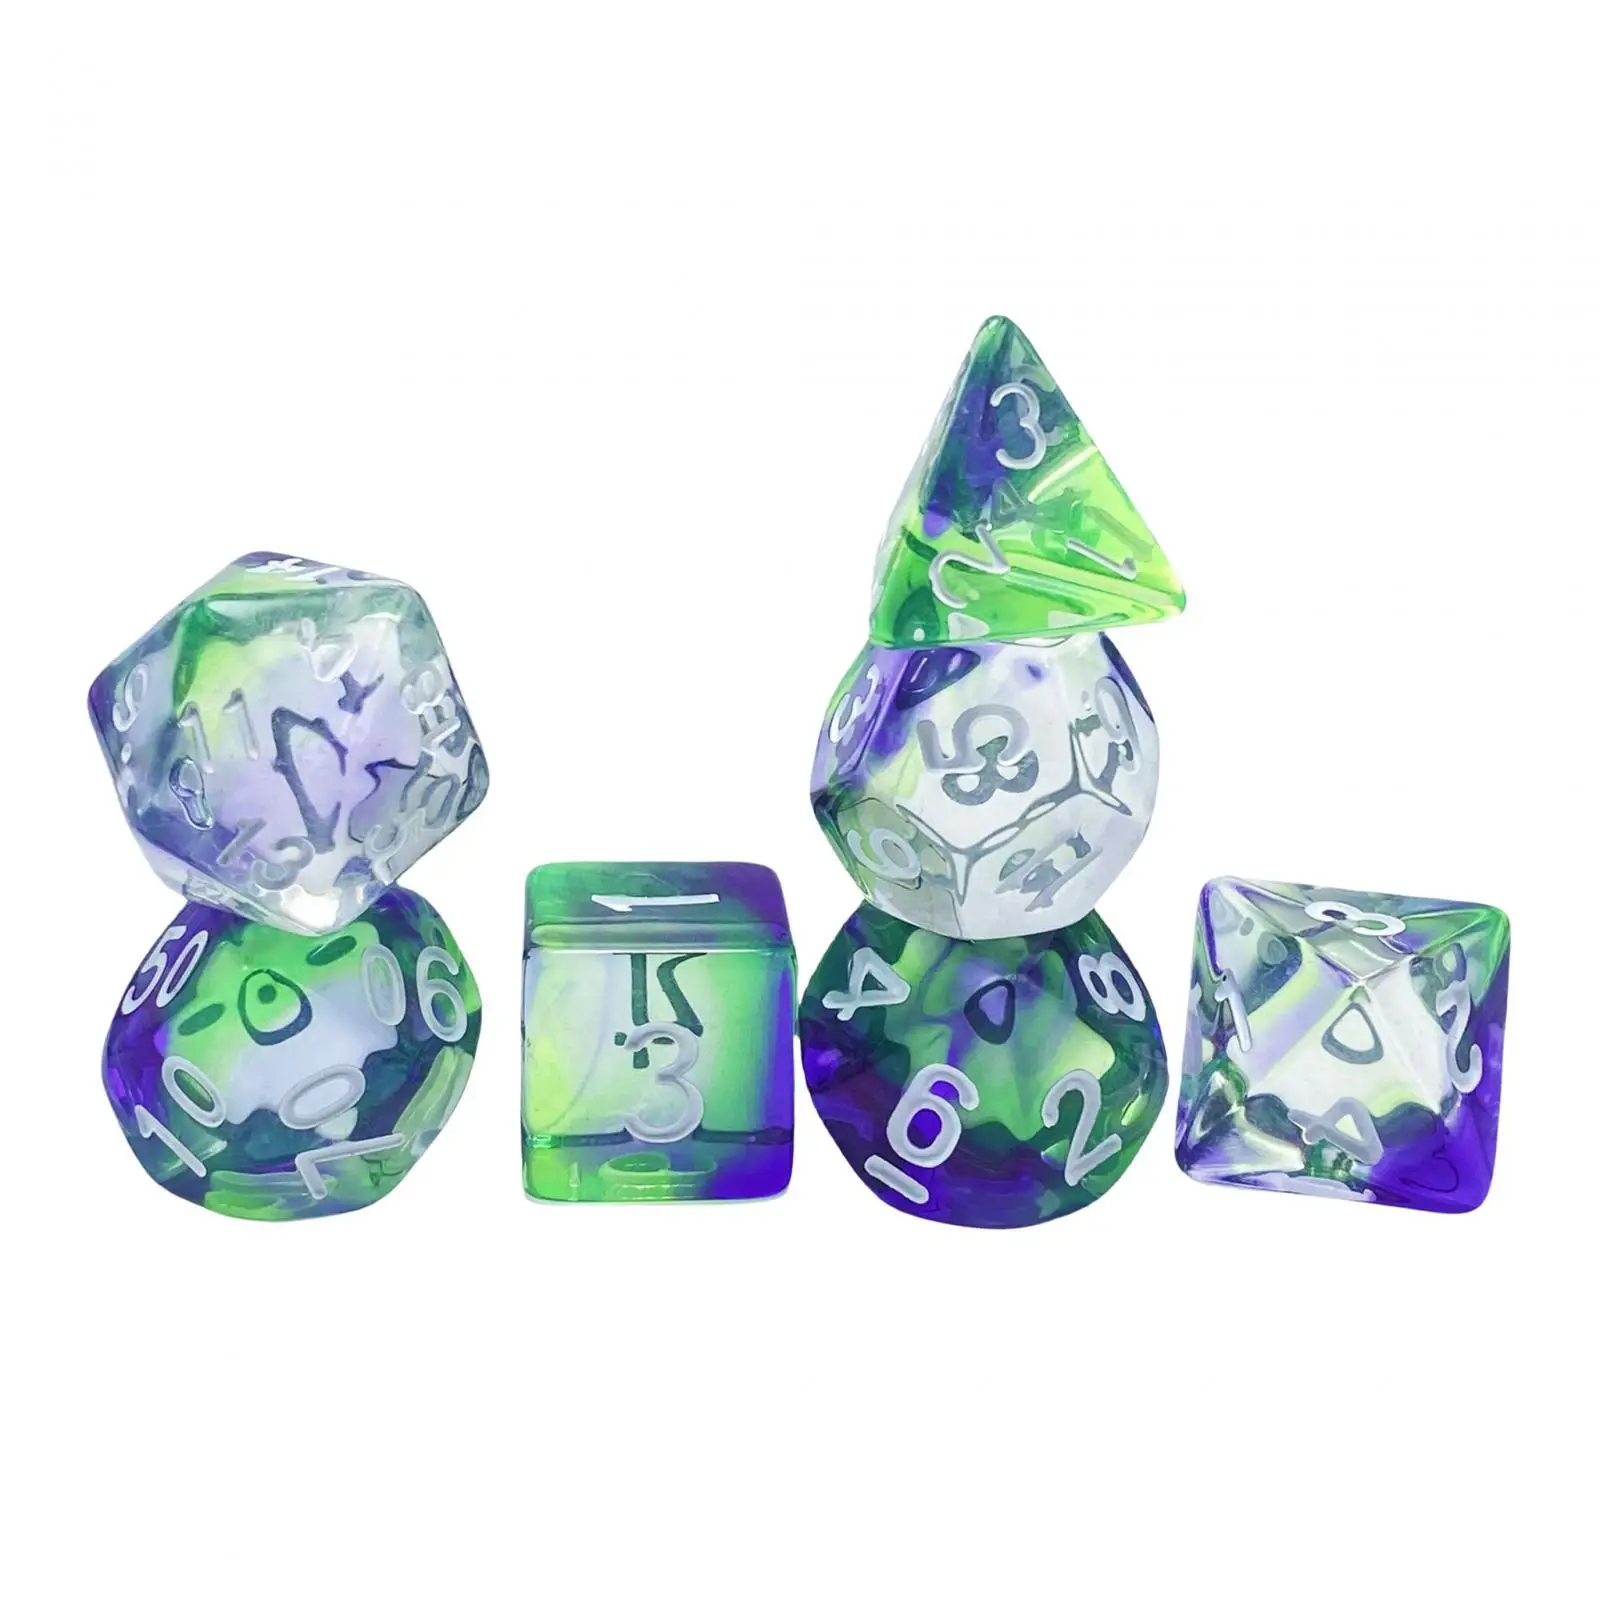 7x Polyhedral Dices Party Supplies Role Playing Game Dices D4-d20 Multi Sided Dices for Card Game Role Playing Games Party Game